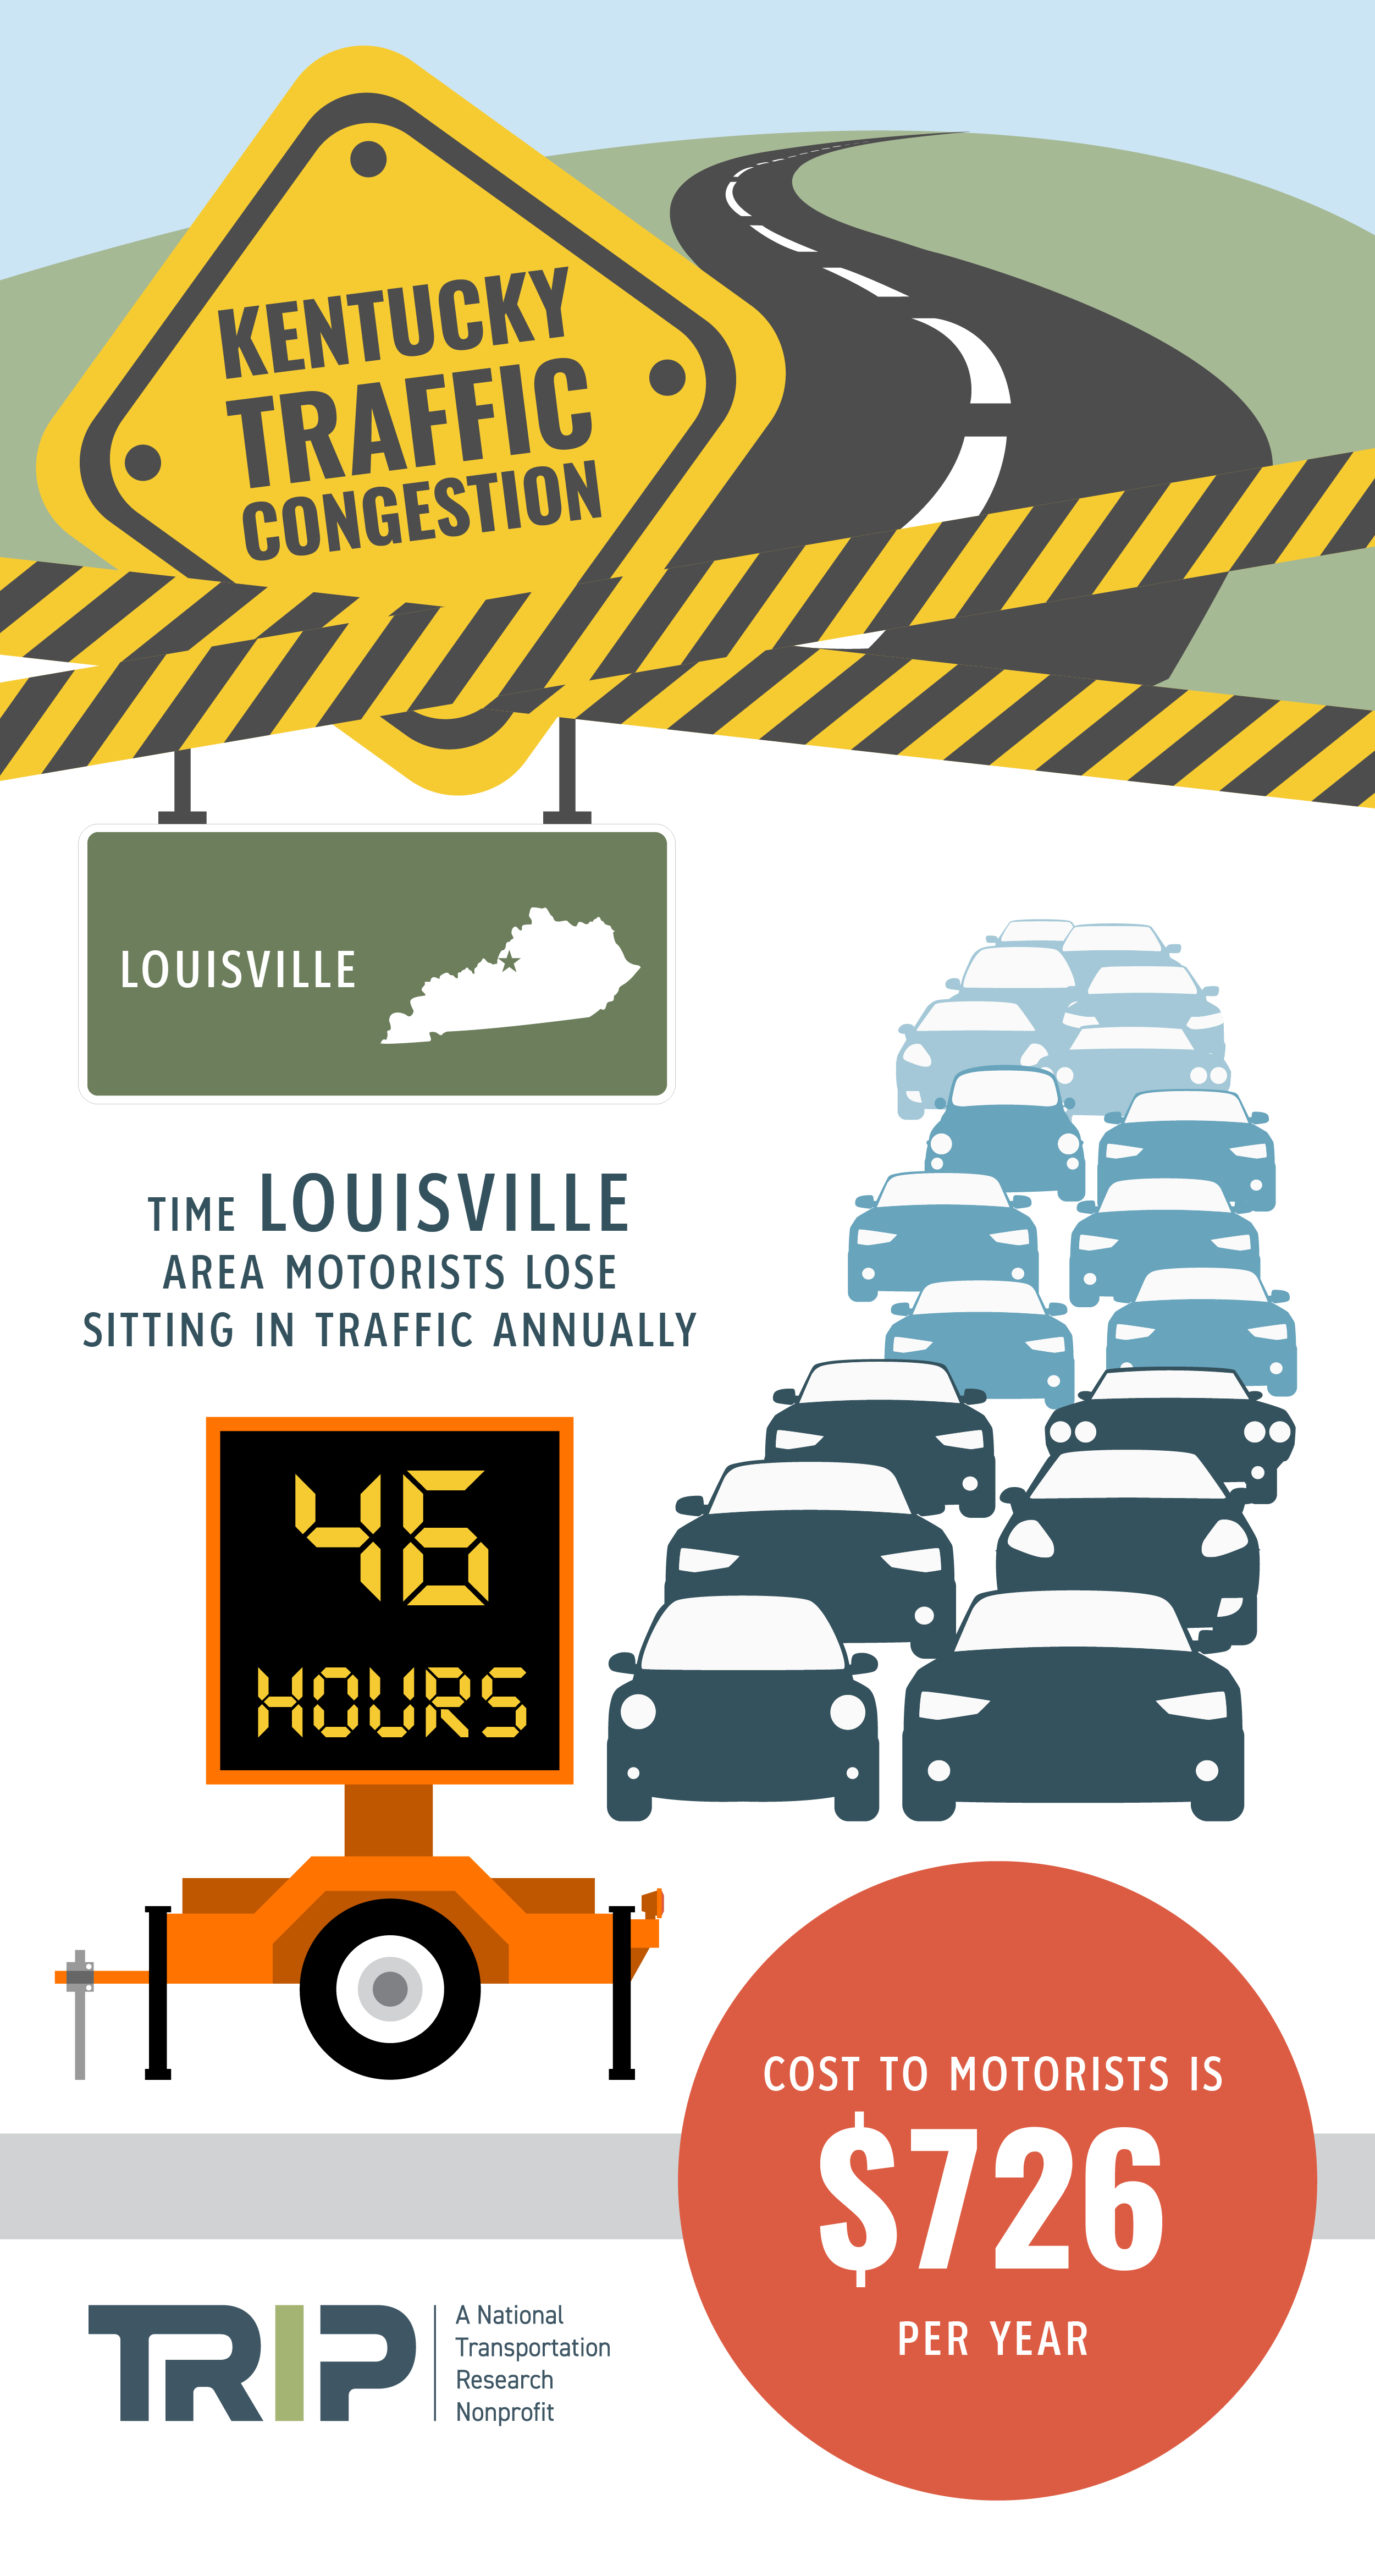 Louisville Traffic Congestion Infographic – March 2020